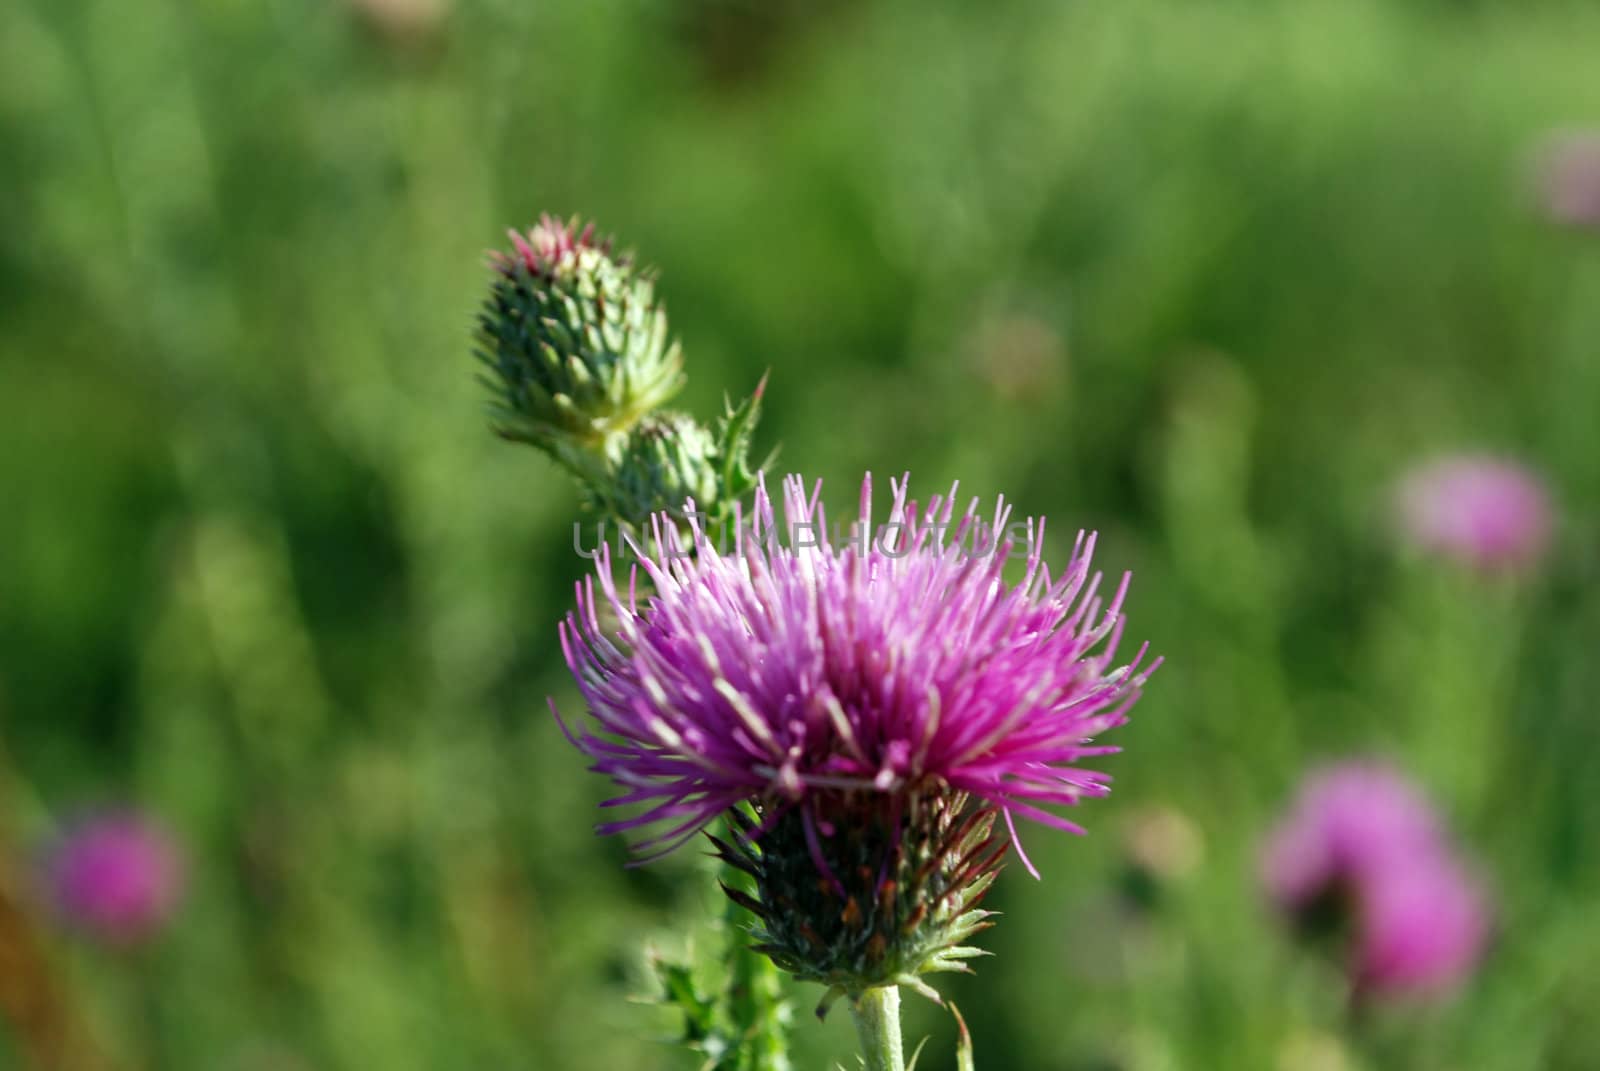 Bull scotch thistle flower in natural background
